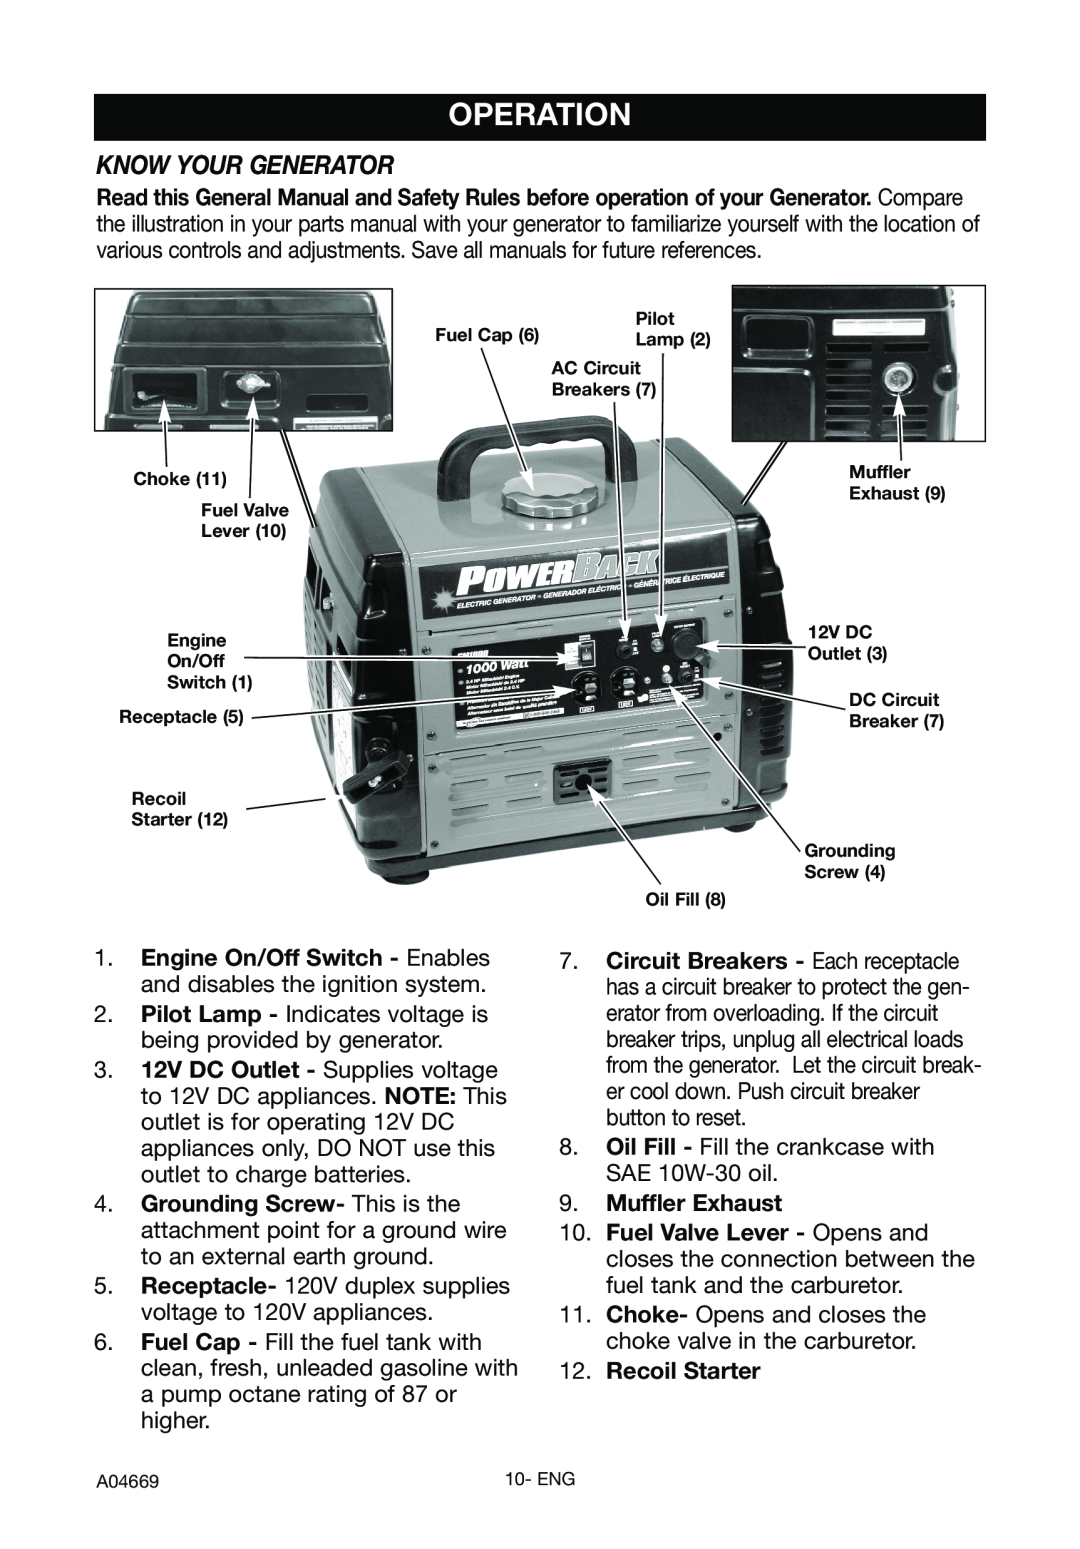 DeVillbiss Air Power Company GM1000, A04669 specifications Operation, Know Your Generator 